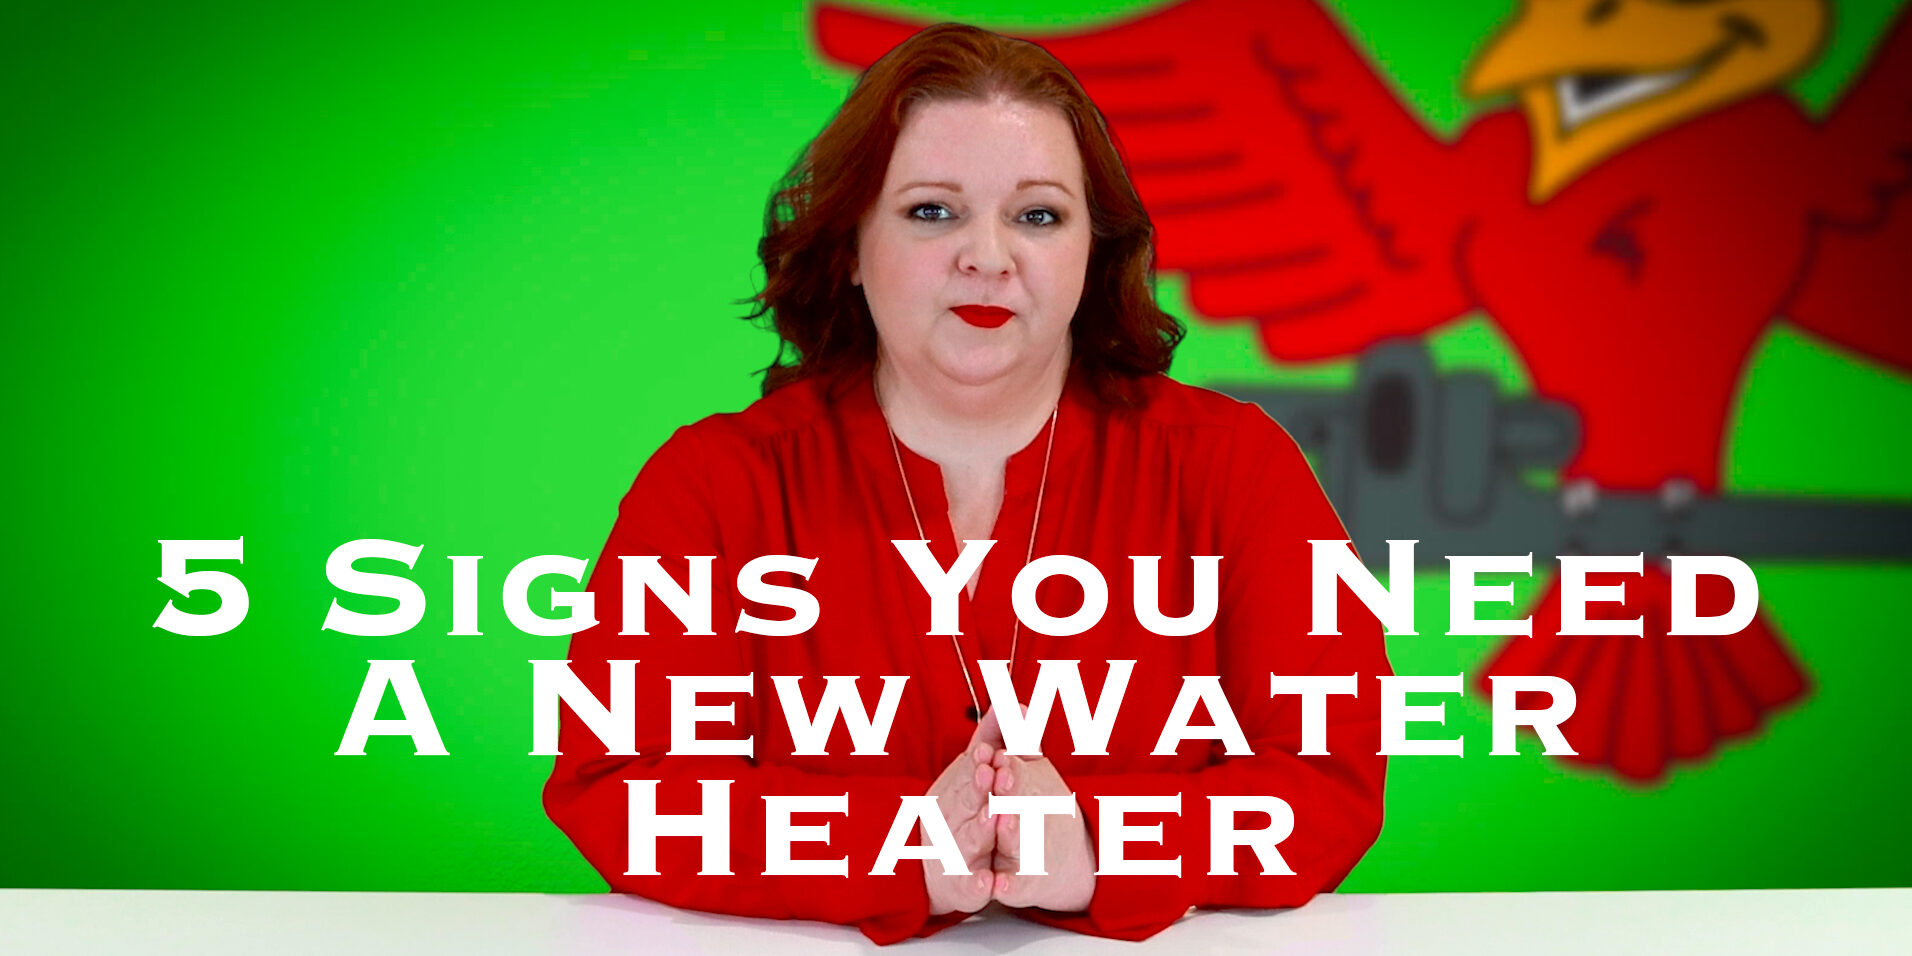 Cover photo for video "5 Signs You Need A New Water Heater"